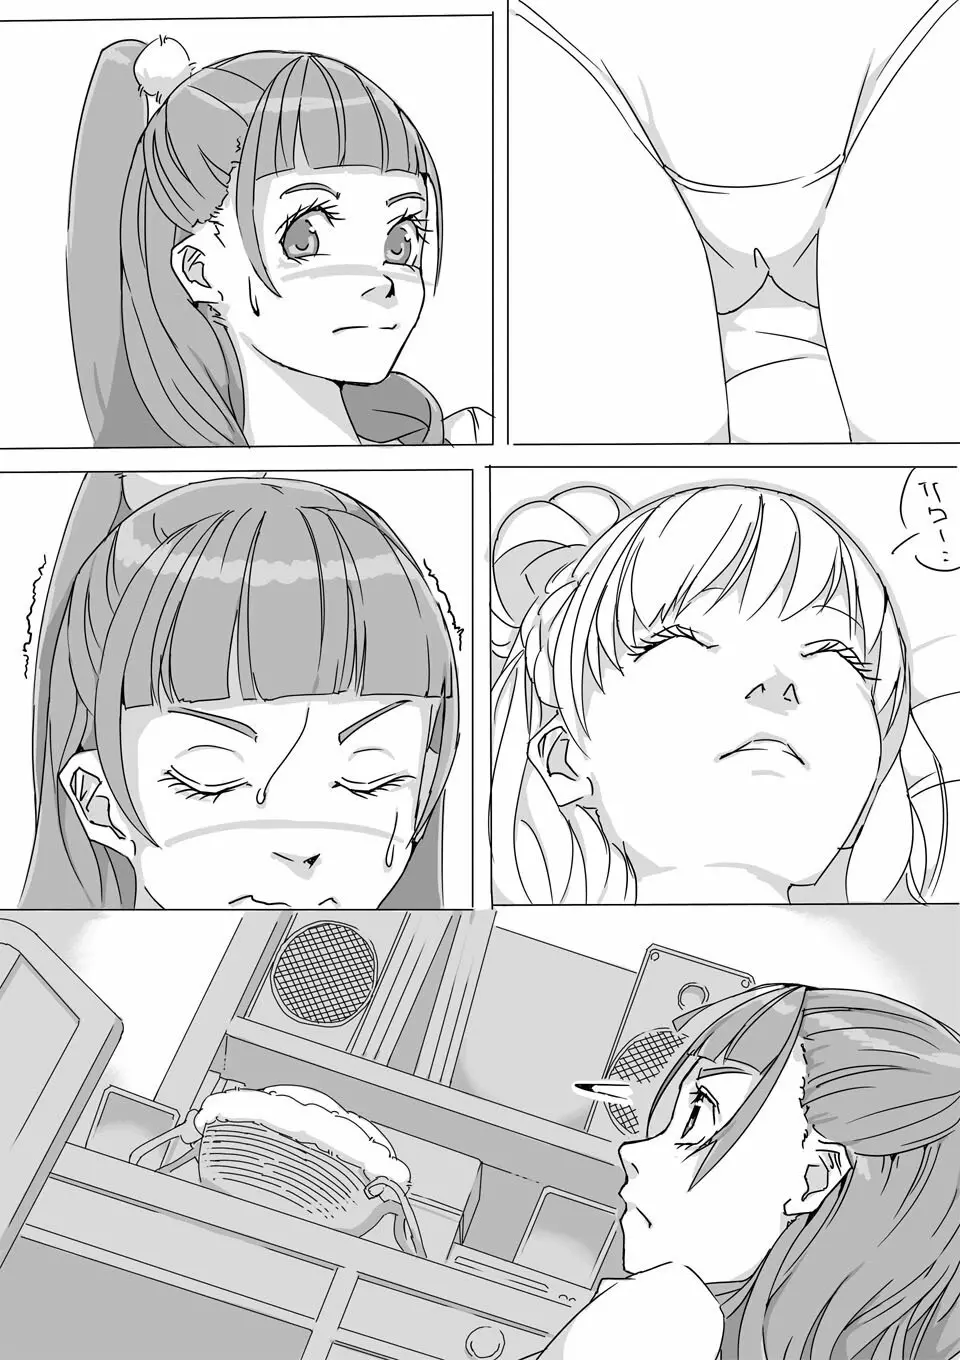 Untitled Precure Doujinshi - page5